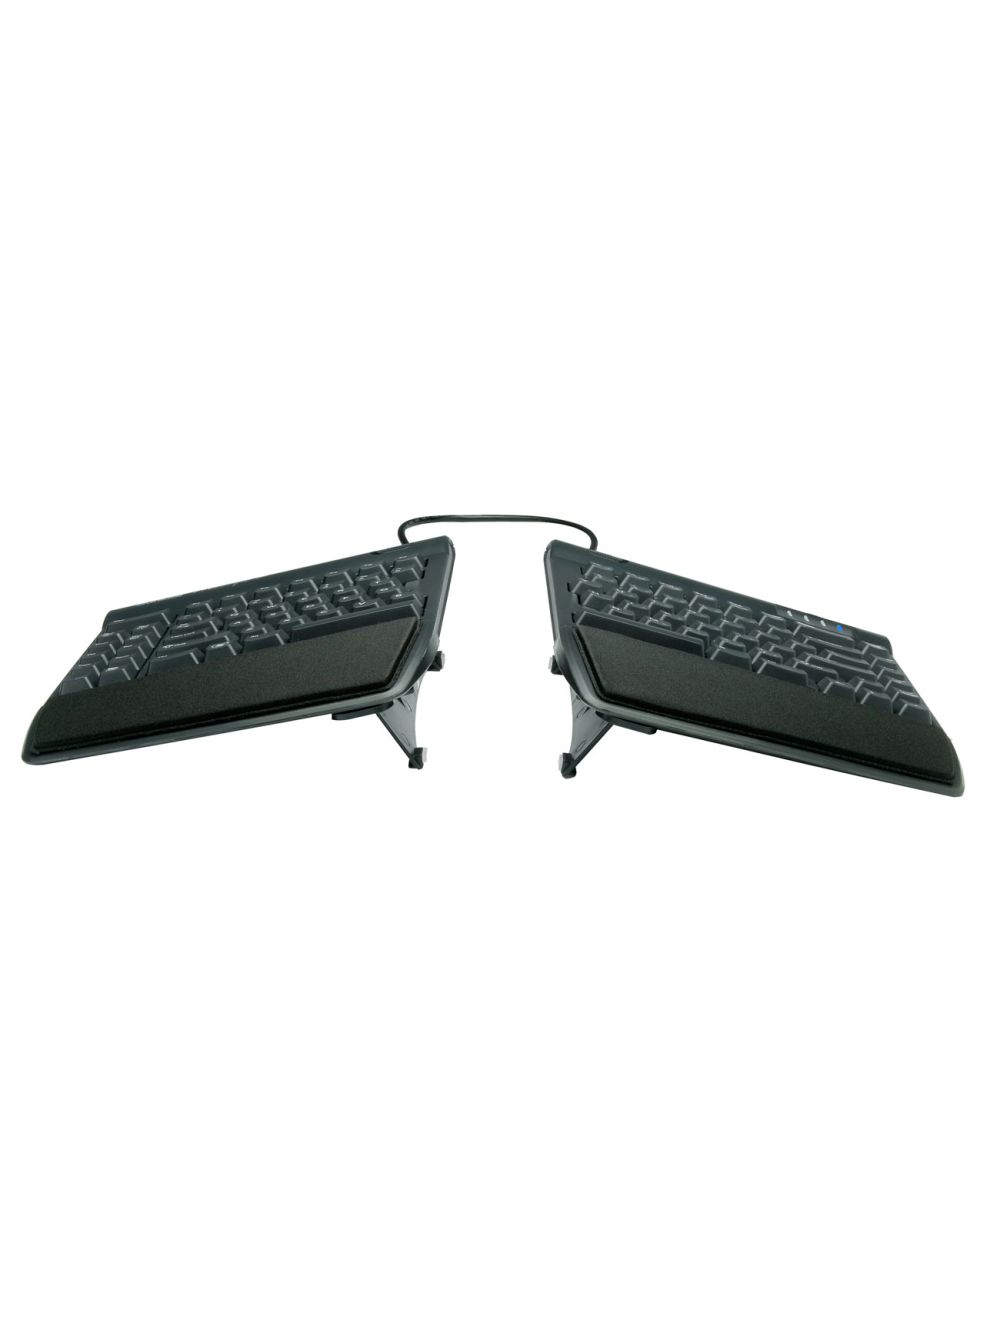 Kinesis Freestyle Solo 2 - Modules with accessory VIP3 1